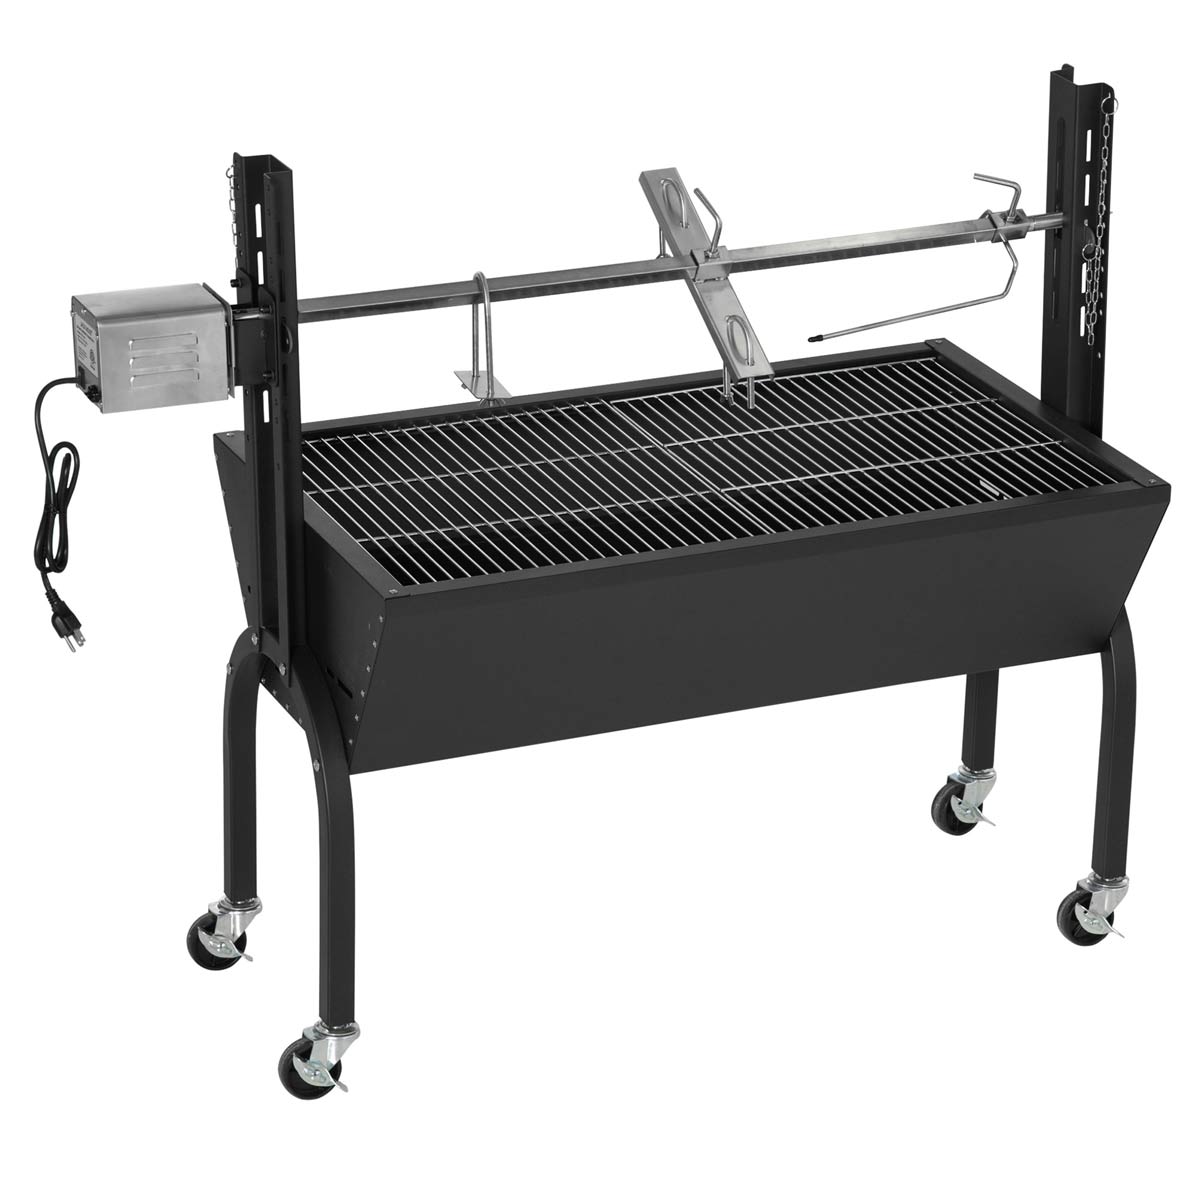 Outsunny Charcoal Bbq Rotisserie Grill Roaster Height Adjustable With Wheels - Black